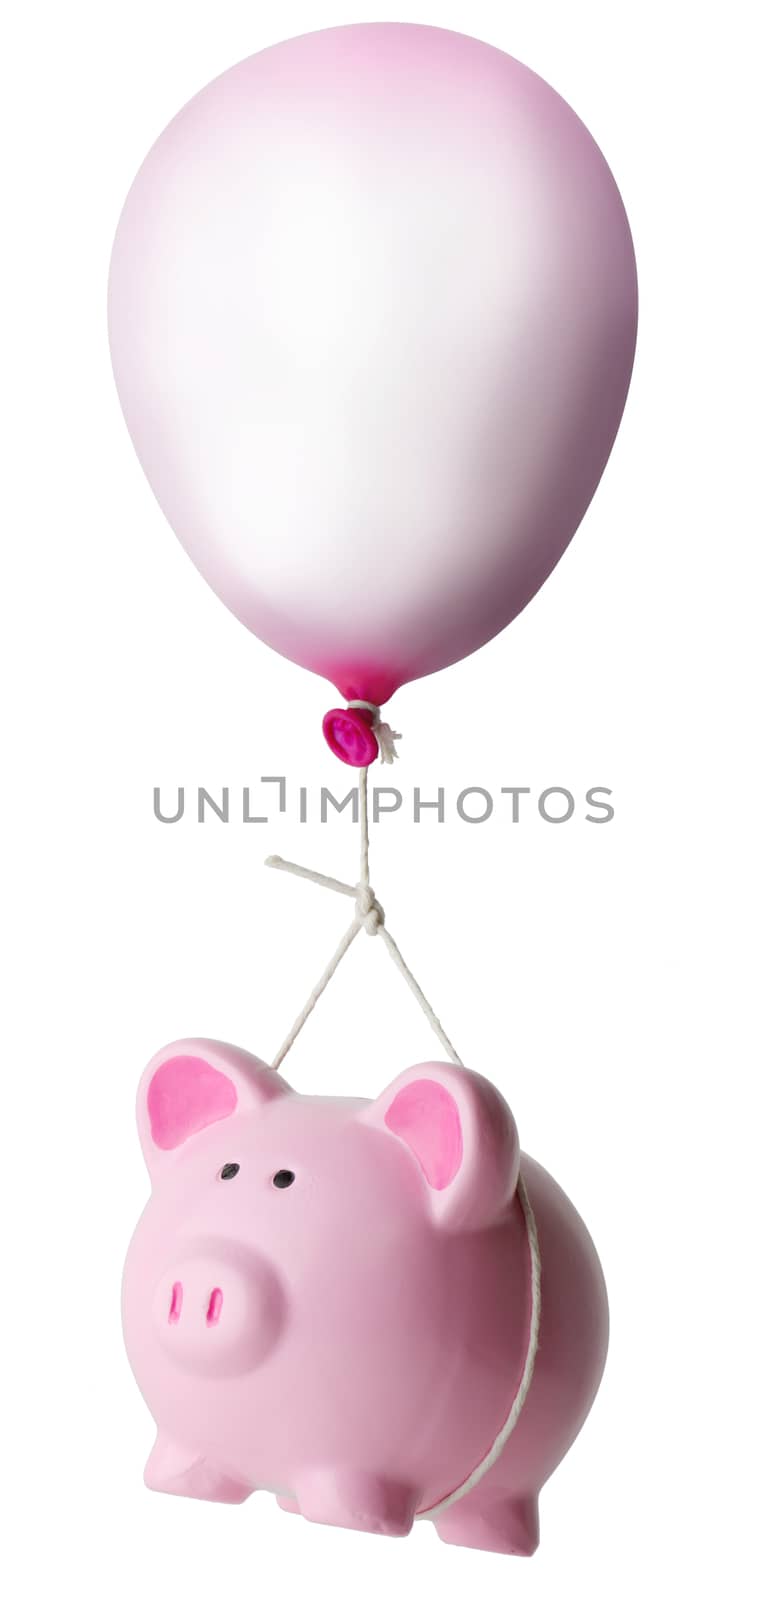 Piggy bank rising on a balloom isolated on a white background